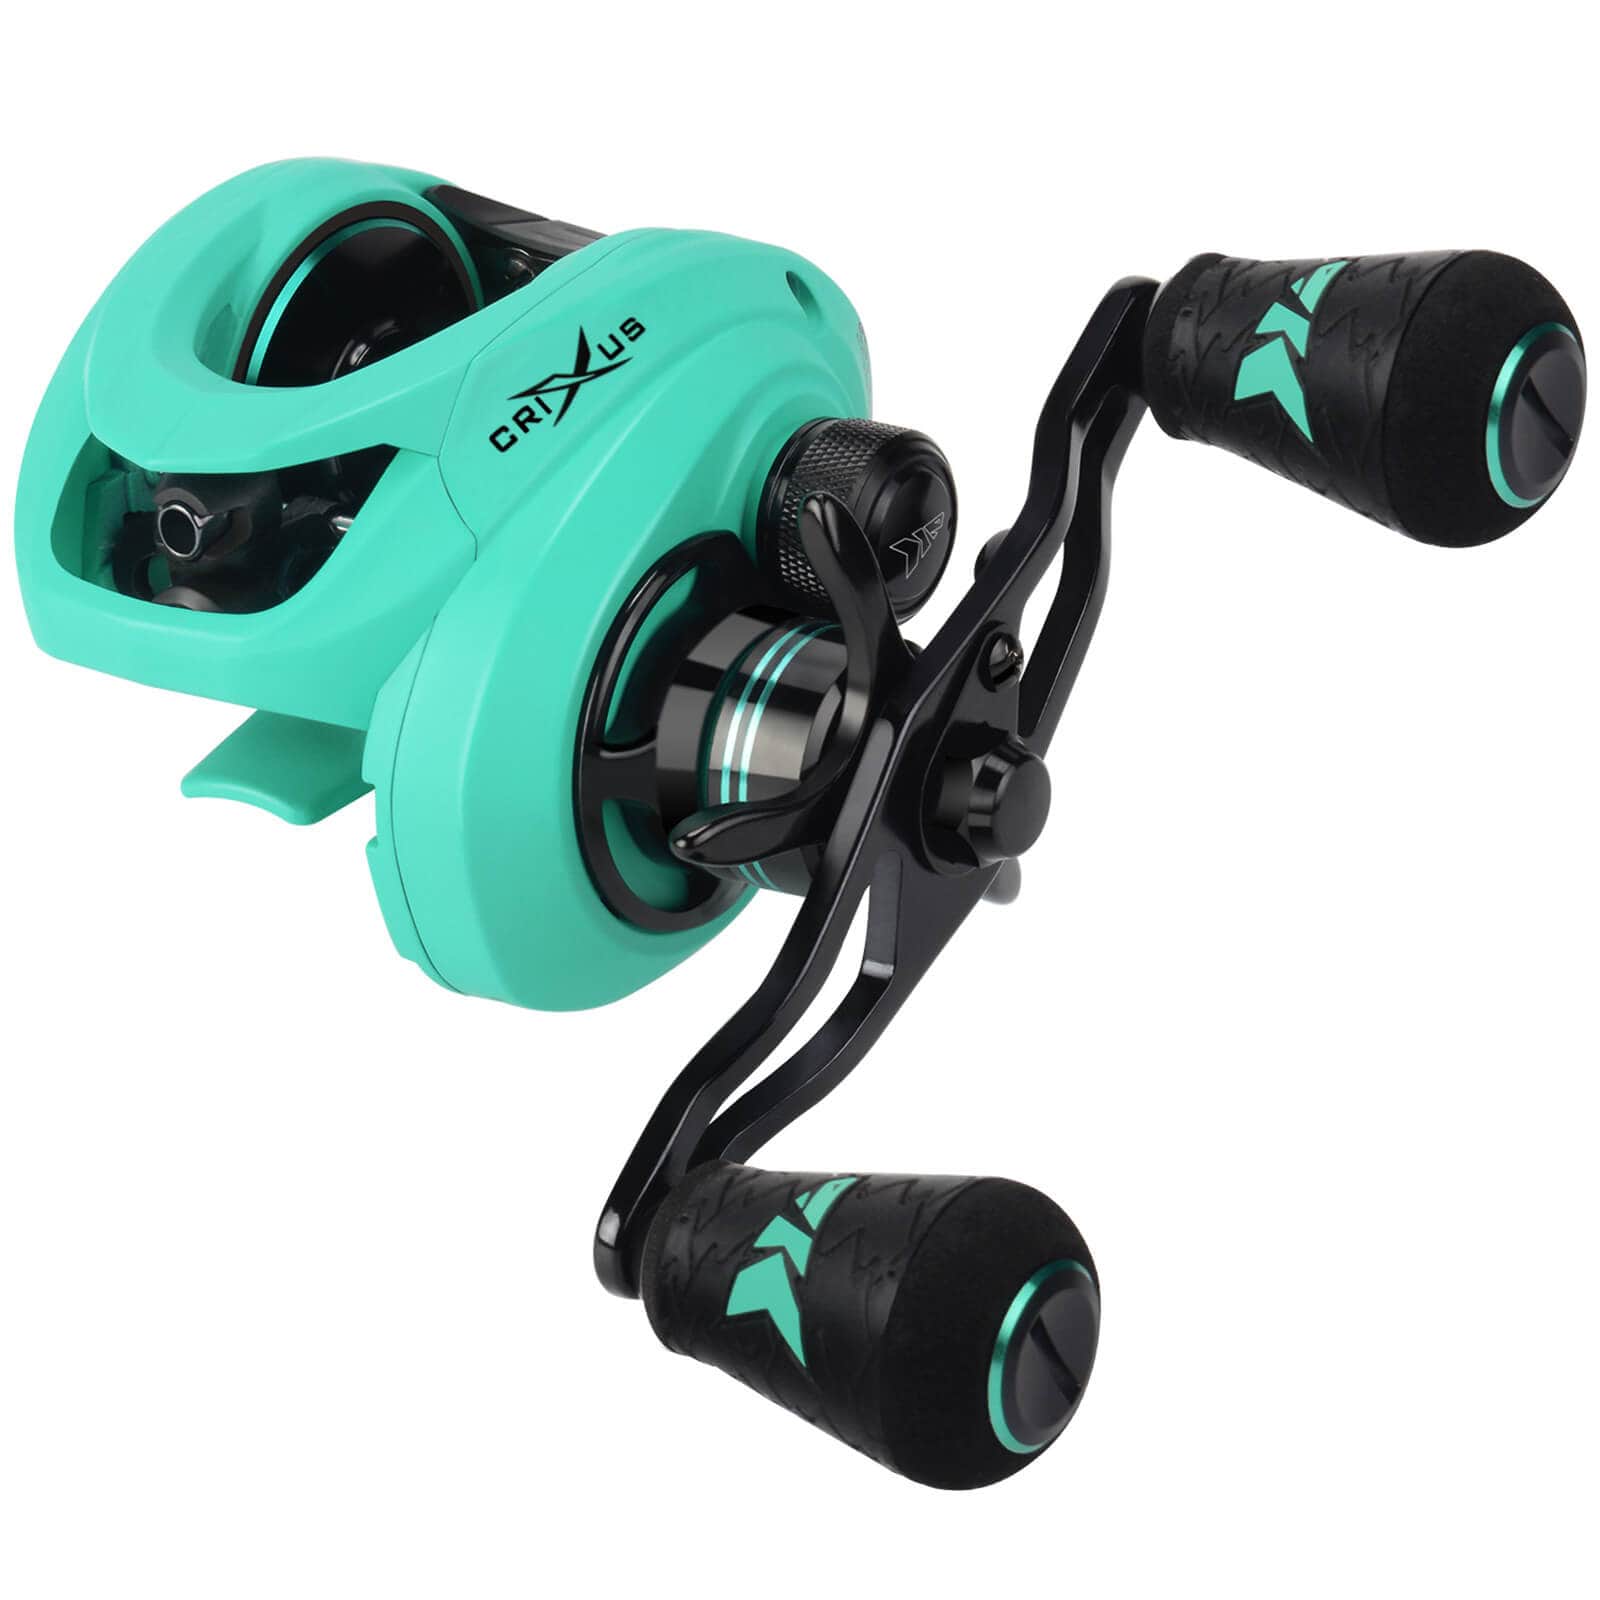 KastKing Crixus Baitcasting Reels, 7.2:1 Gear Ratio Fishing Reels, 17.6lbs Carbon Disc Drag, Super Polymer Grips,Carbon Infused Nylon Frame